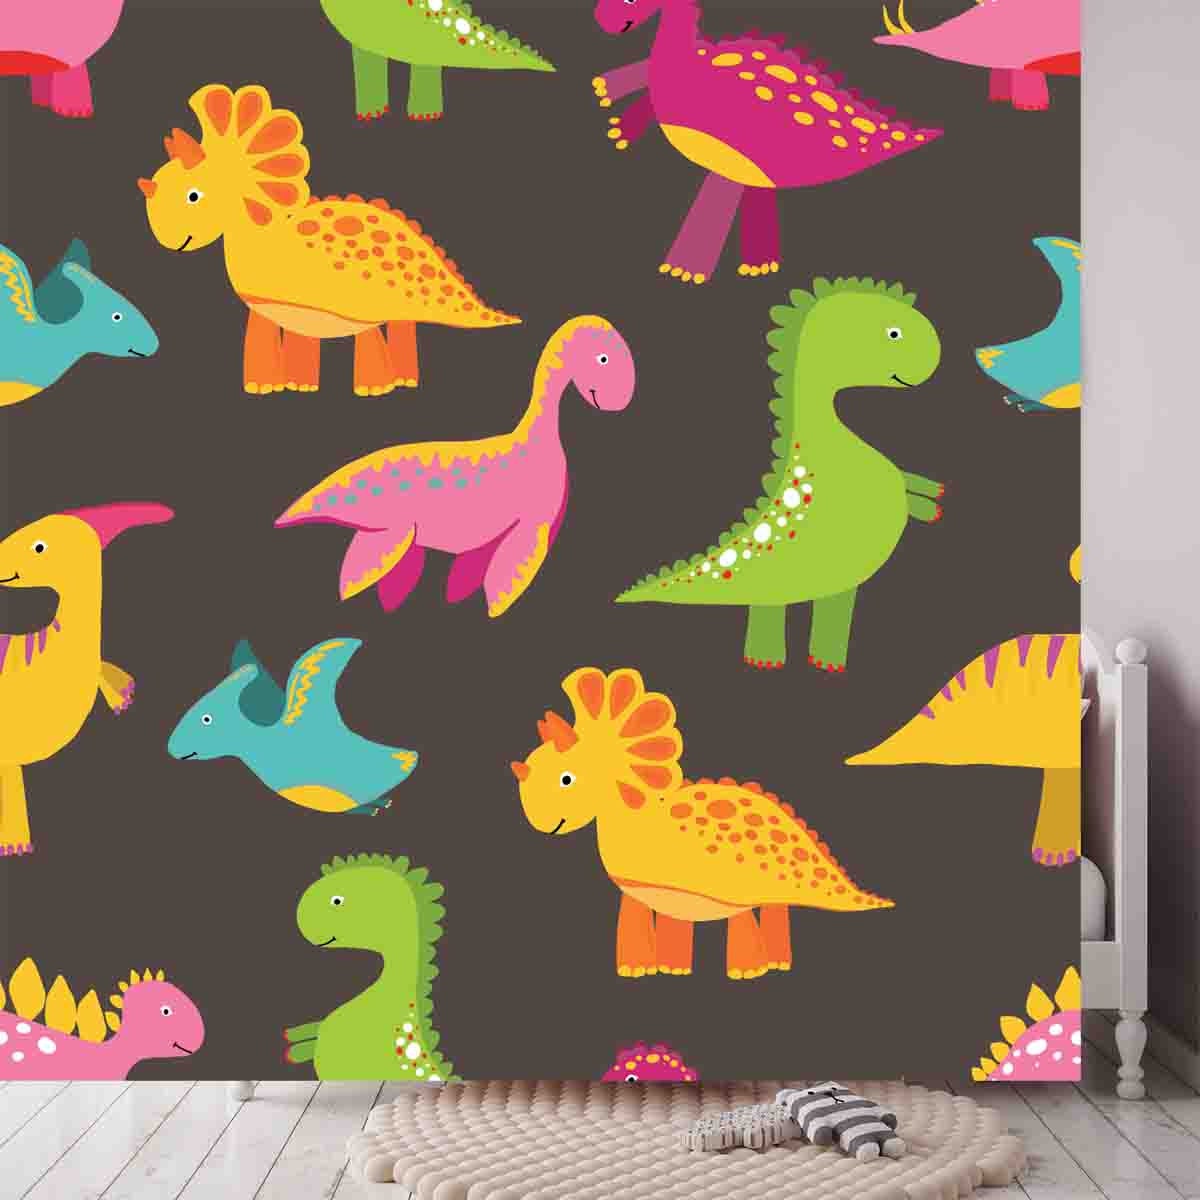 Colorful Cartoon Dinosaurs of Different Types Wallpaper Little Girl Bedroom Mural